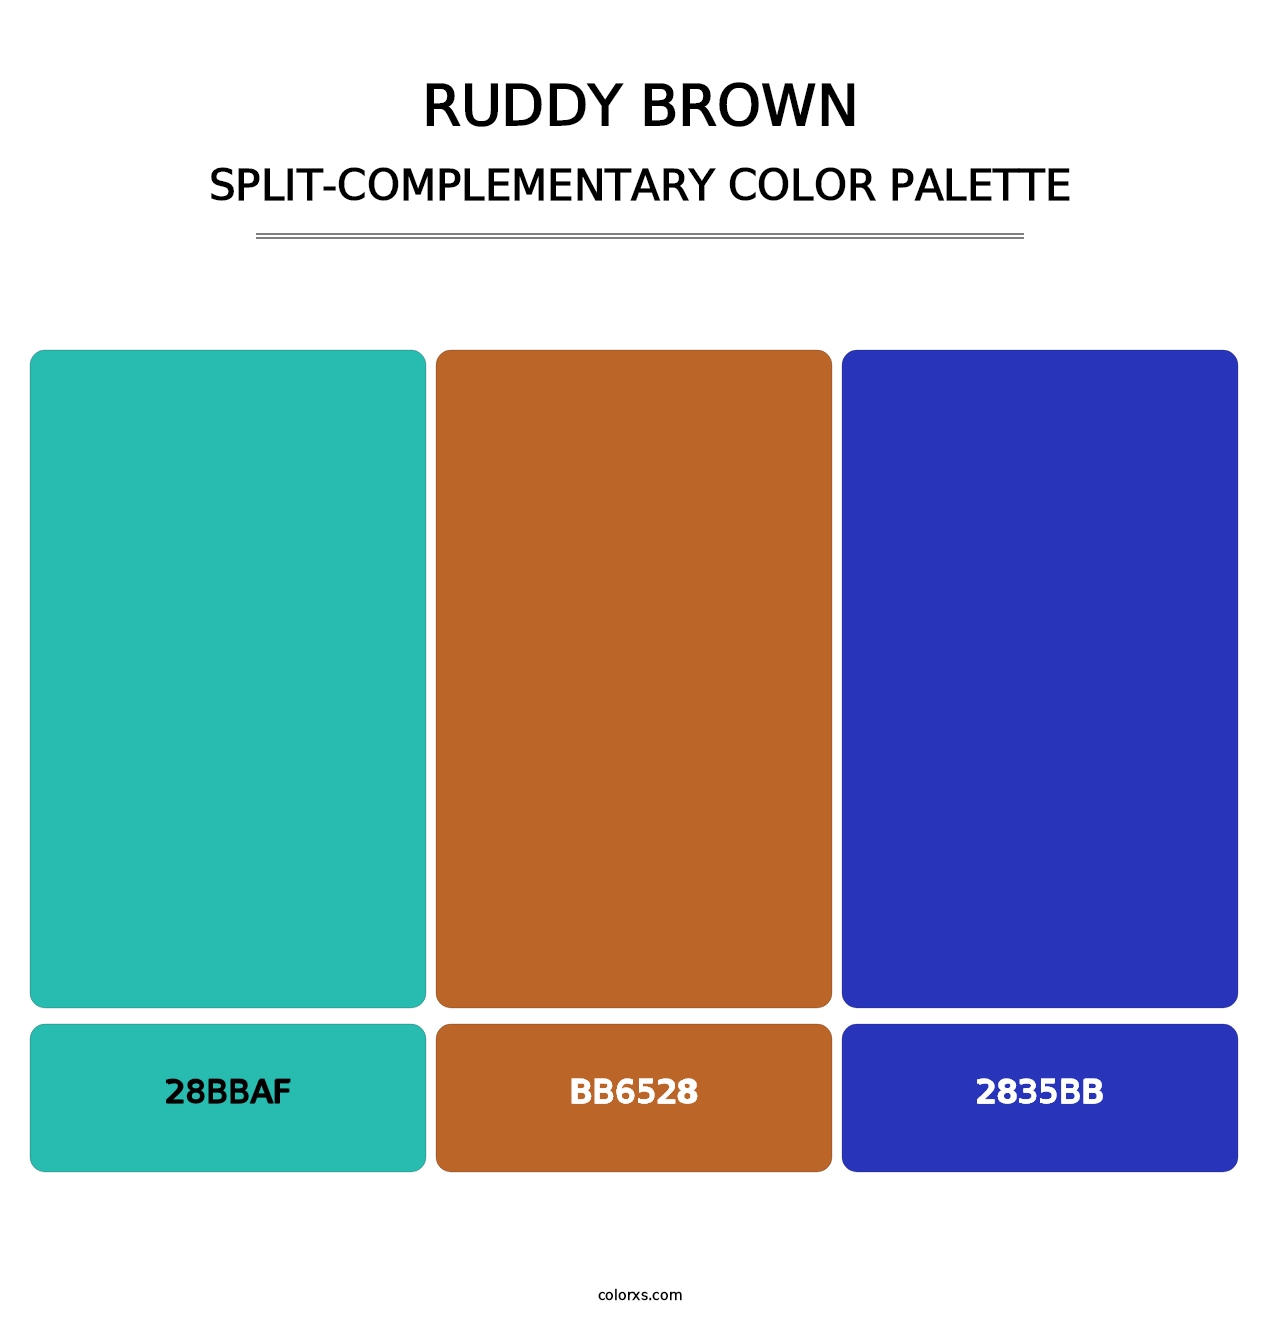 Ruddy Brown - Split-Complementary Color Palette